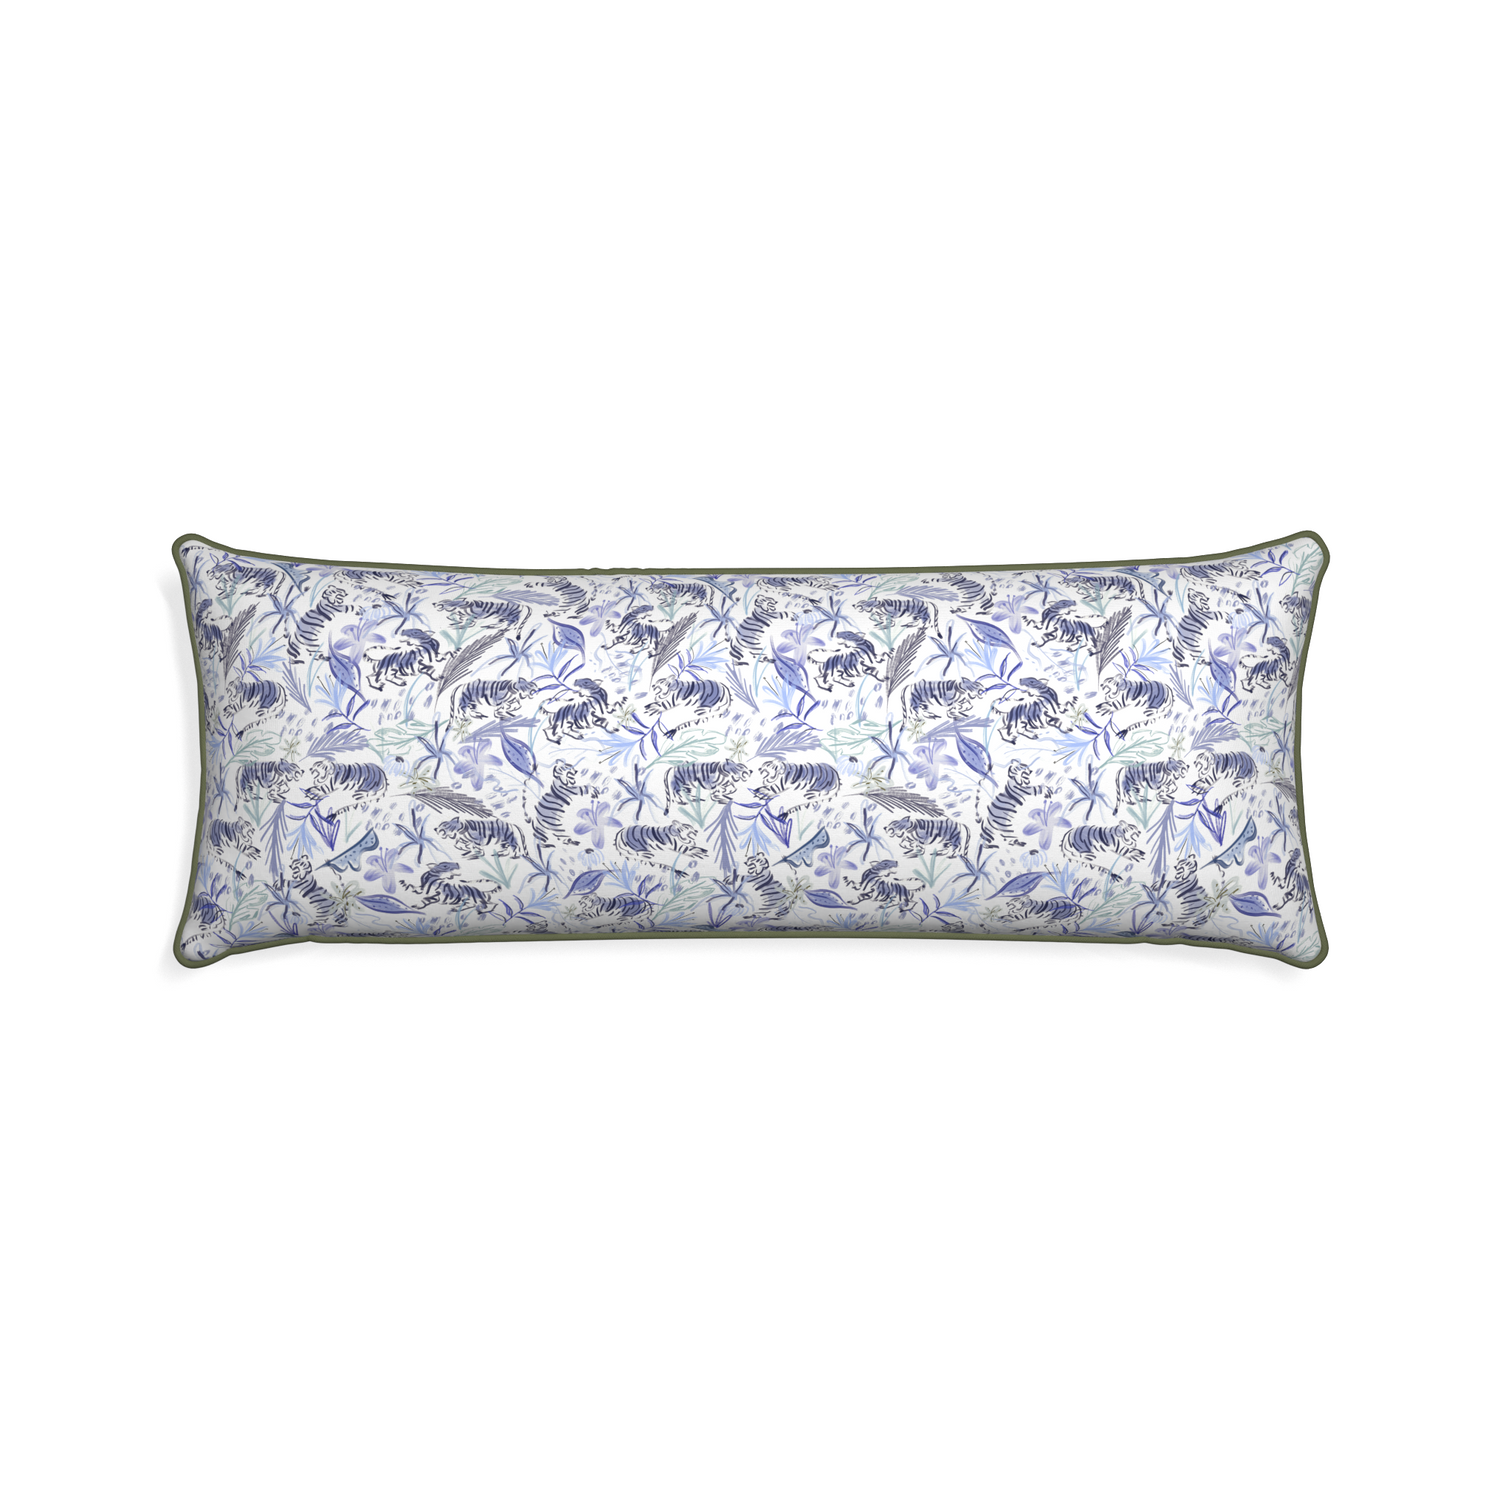 Xl-lumbar frida blue custom blue with intricate tiger designpillow with f piping on white background